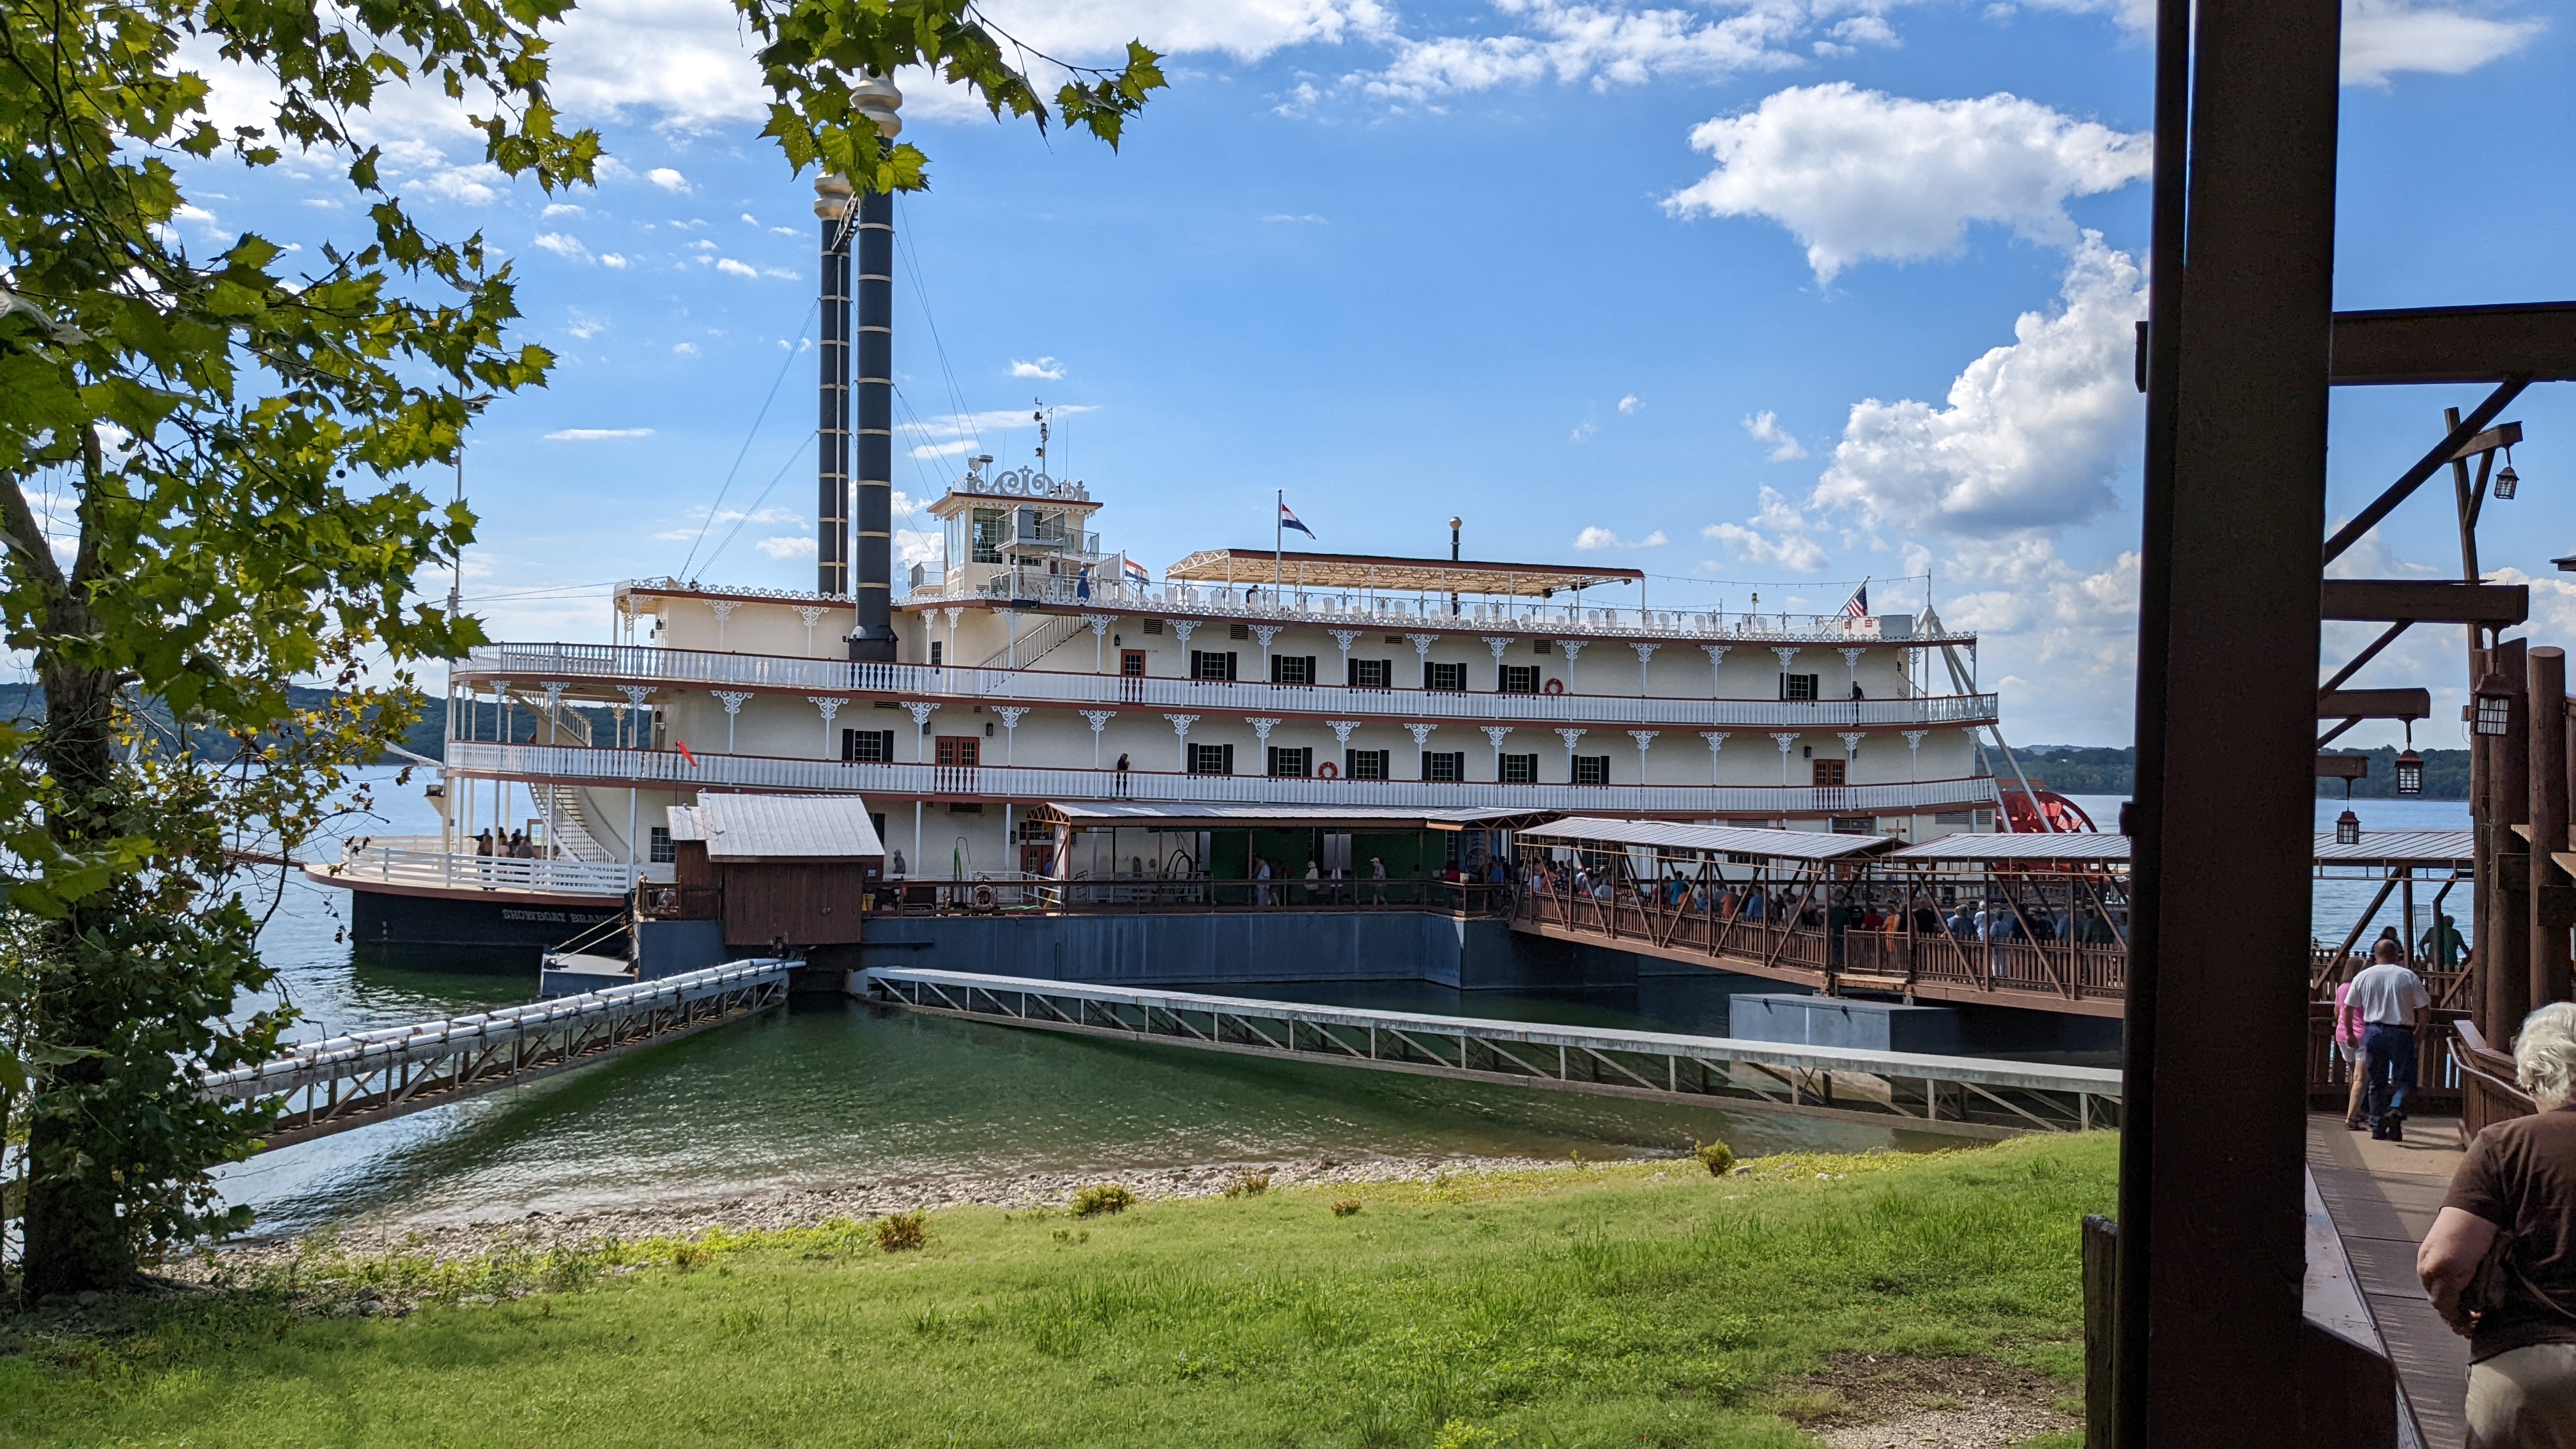 Picture of a place: Showboat Branson Belle